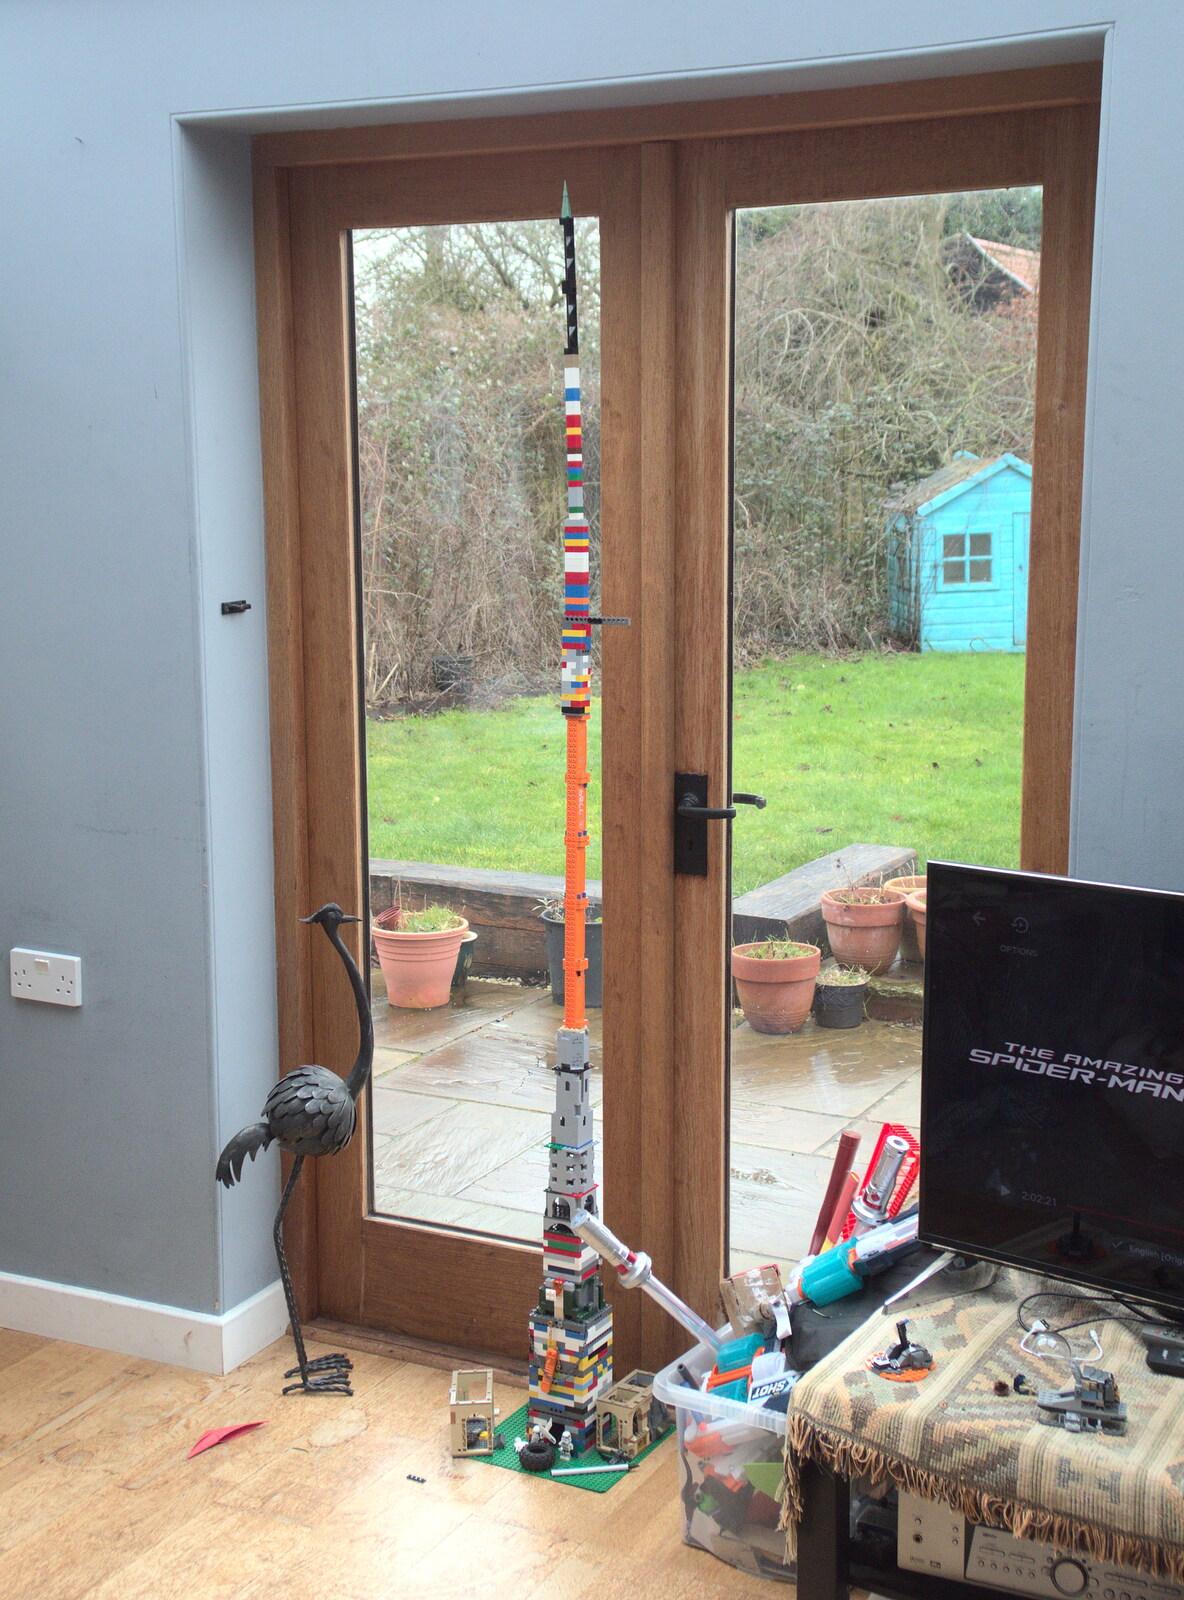 Fred has built a very tall tower out of Lego from The Lost Pubs of Norwich, Norfolk - 13th February 2022